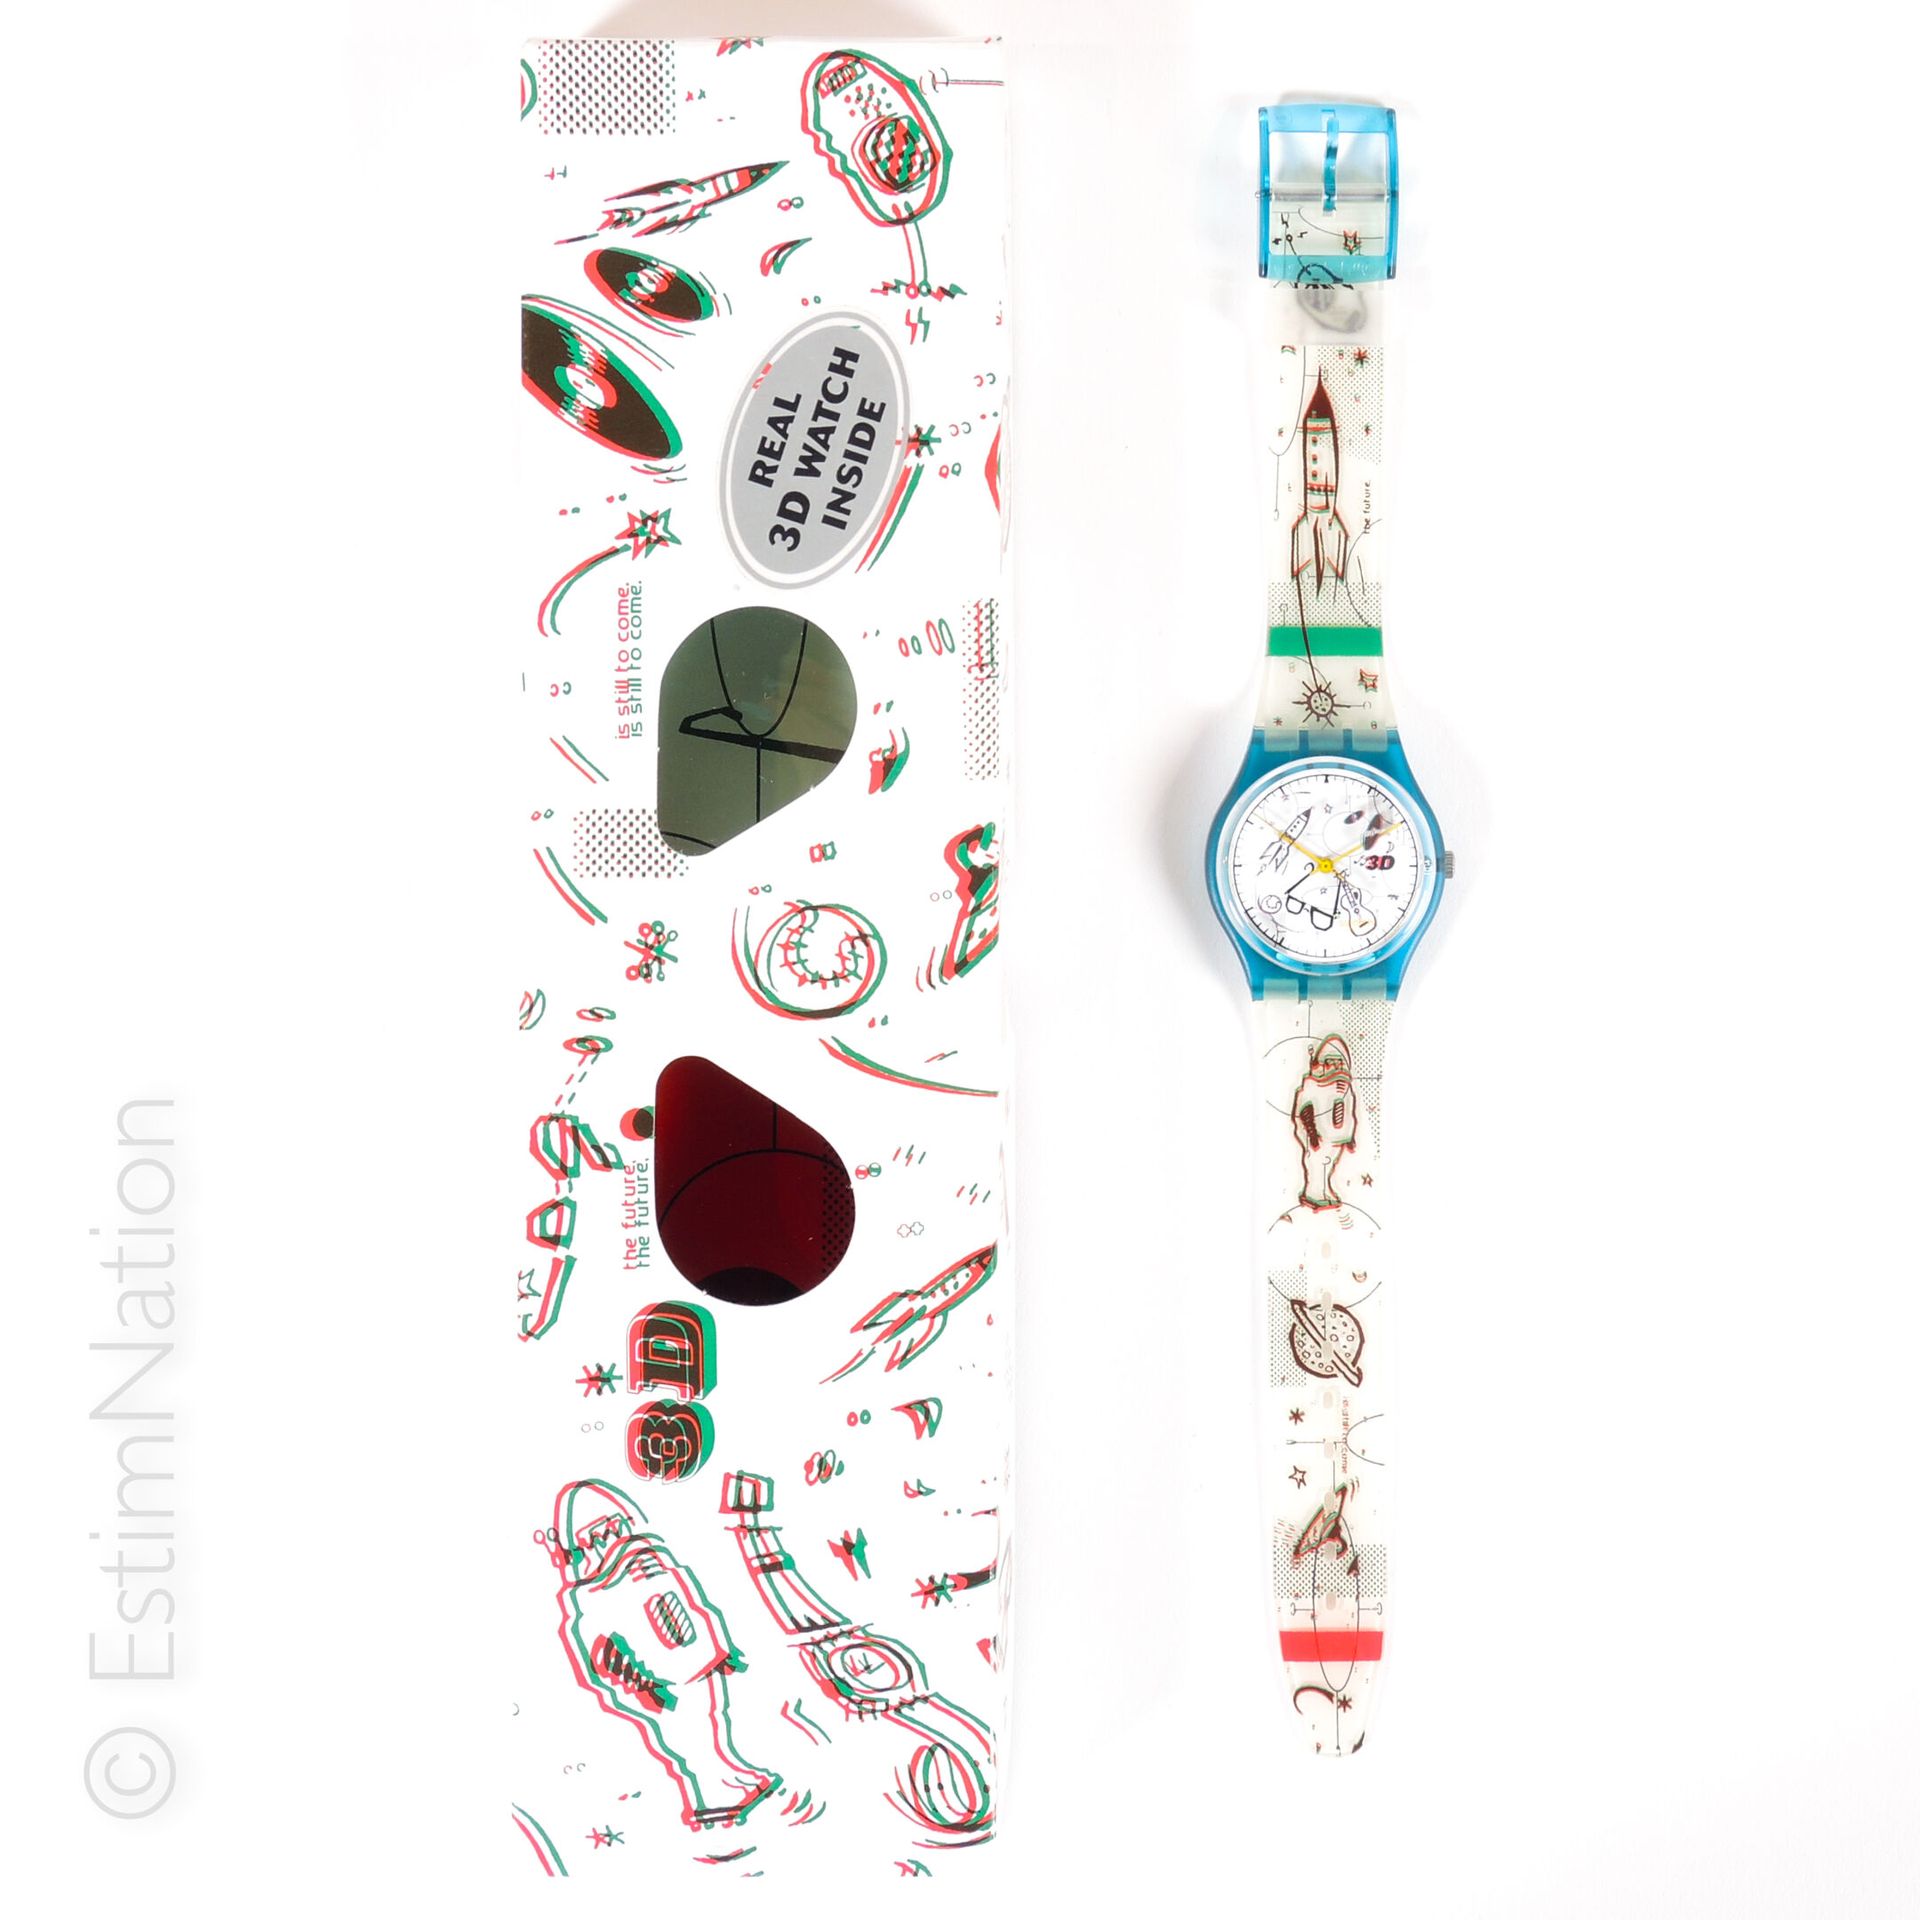 SWATCH - 3D EXPERIENCE - 1996 SWATCH - 3D EXPERIENCE

The Originals : Gent



Co&hellip;